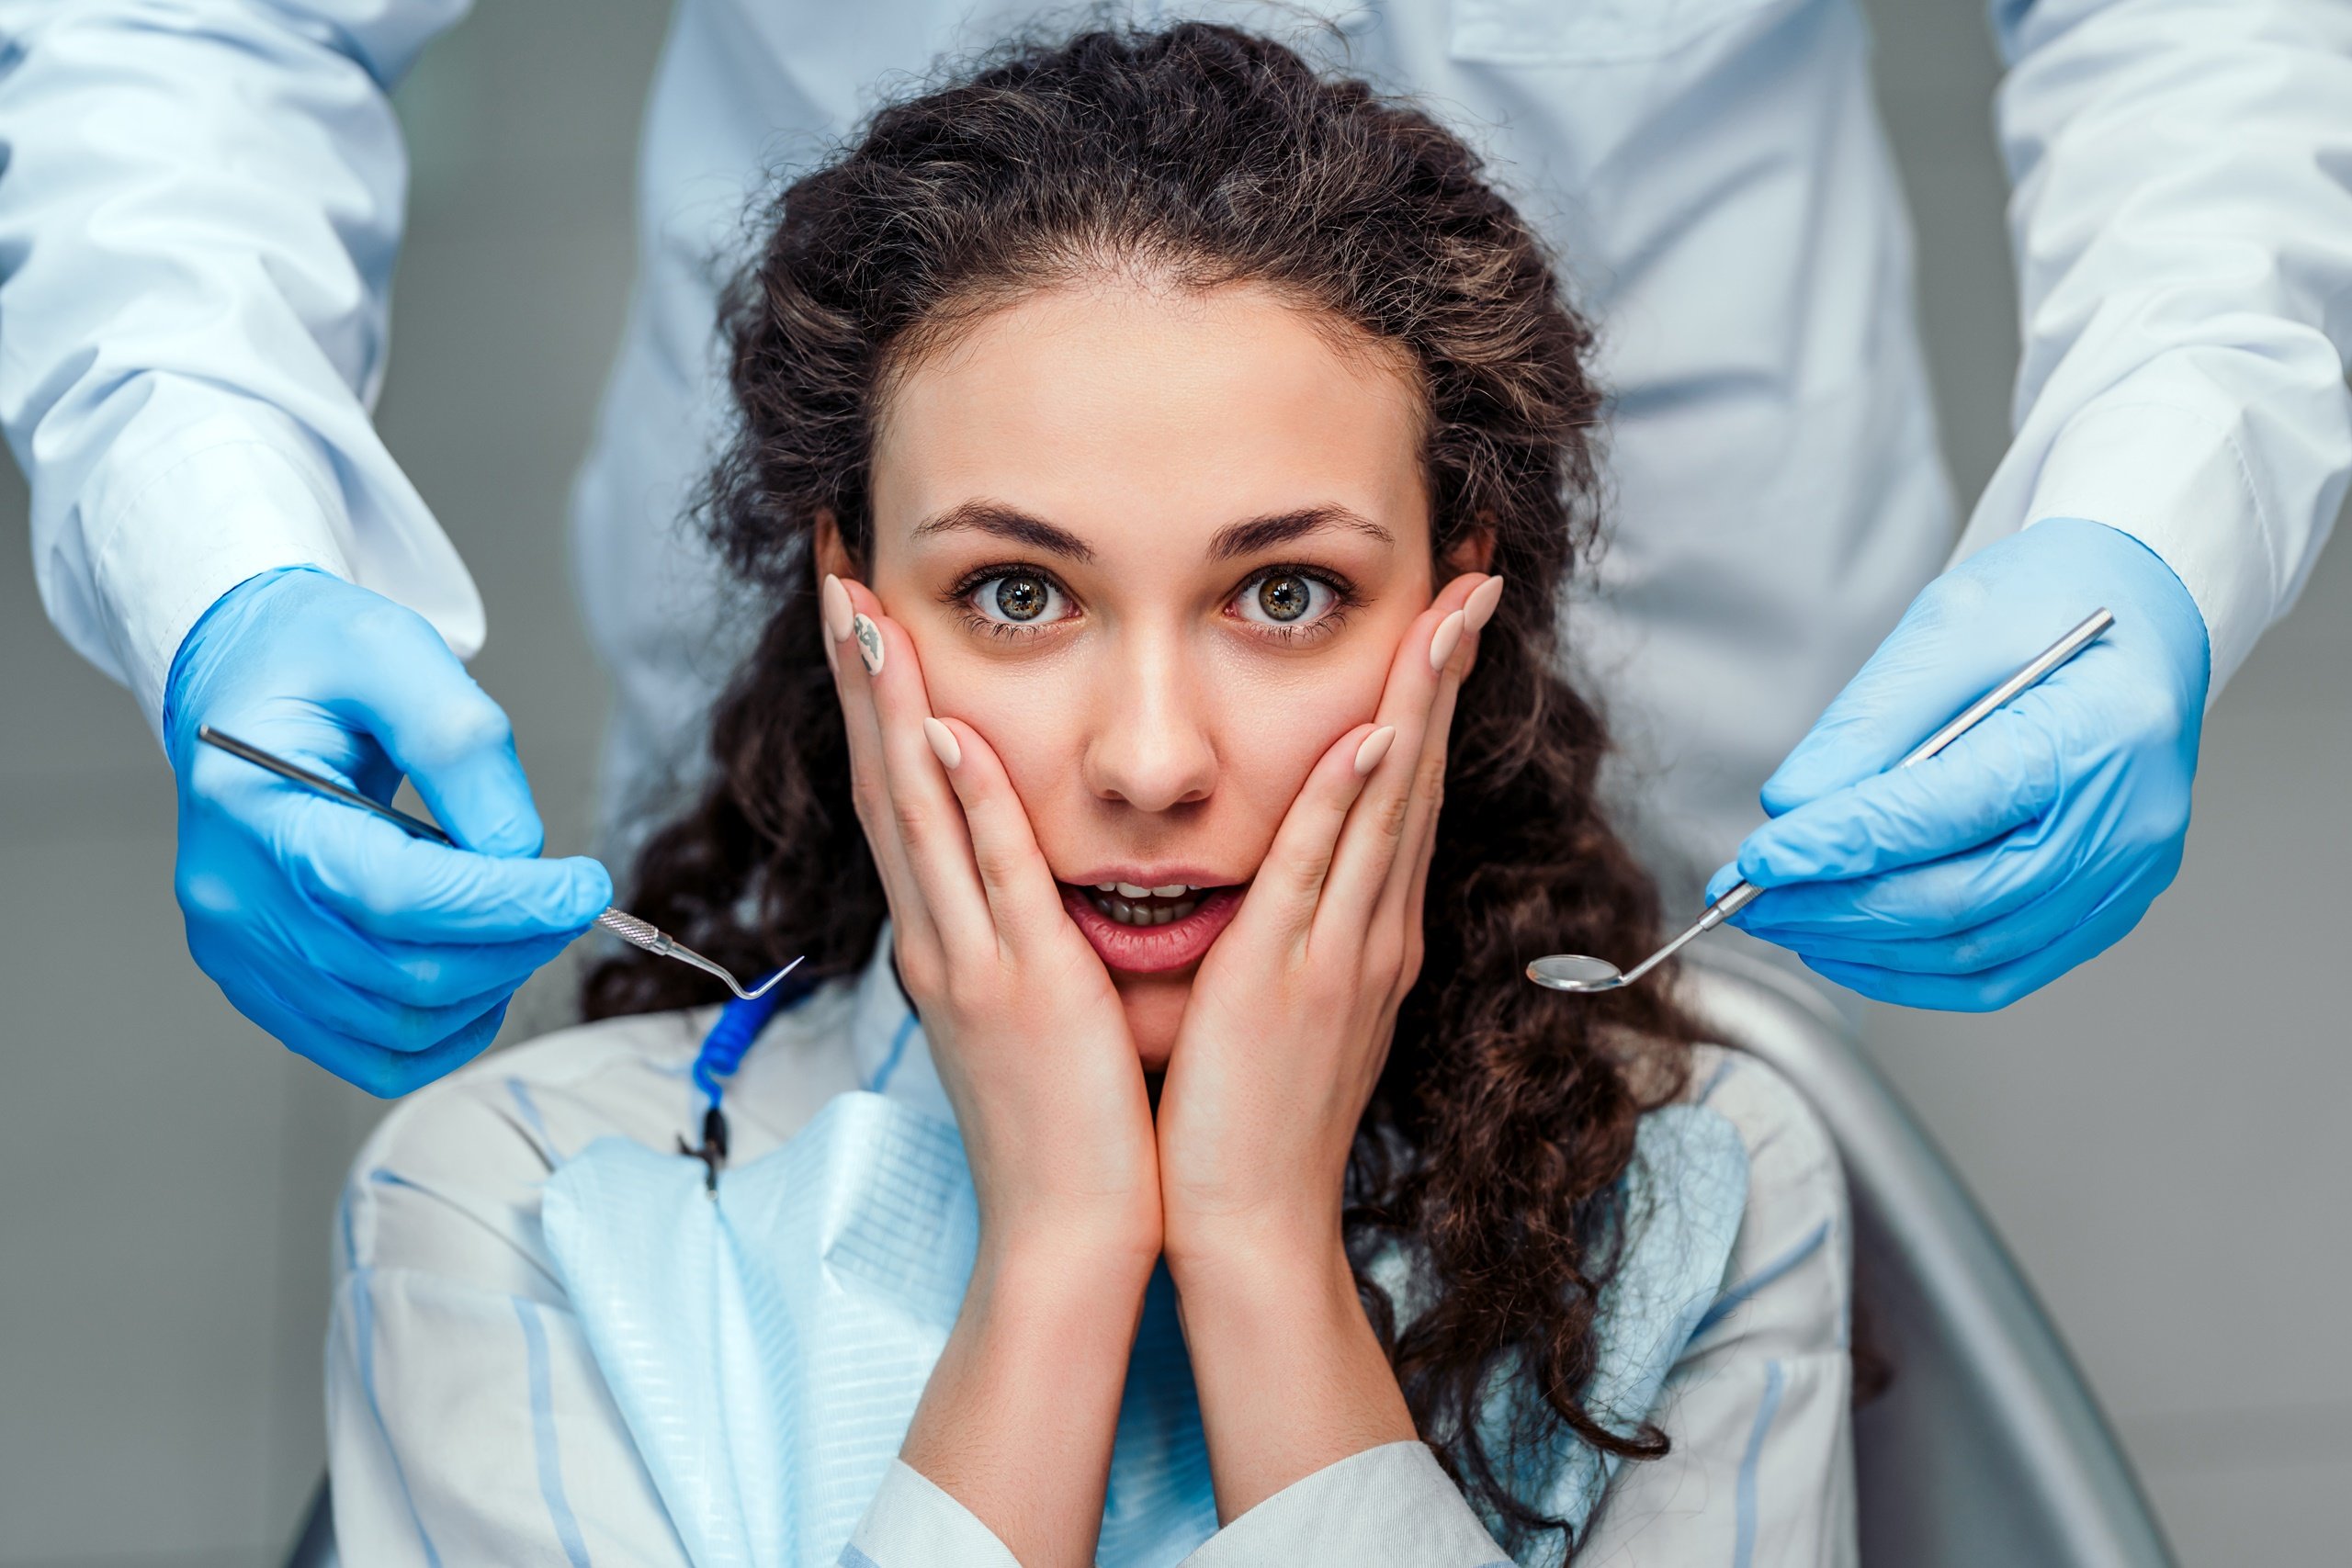 How to cope with dental anxiety?